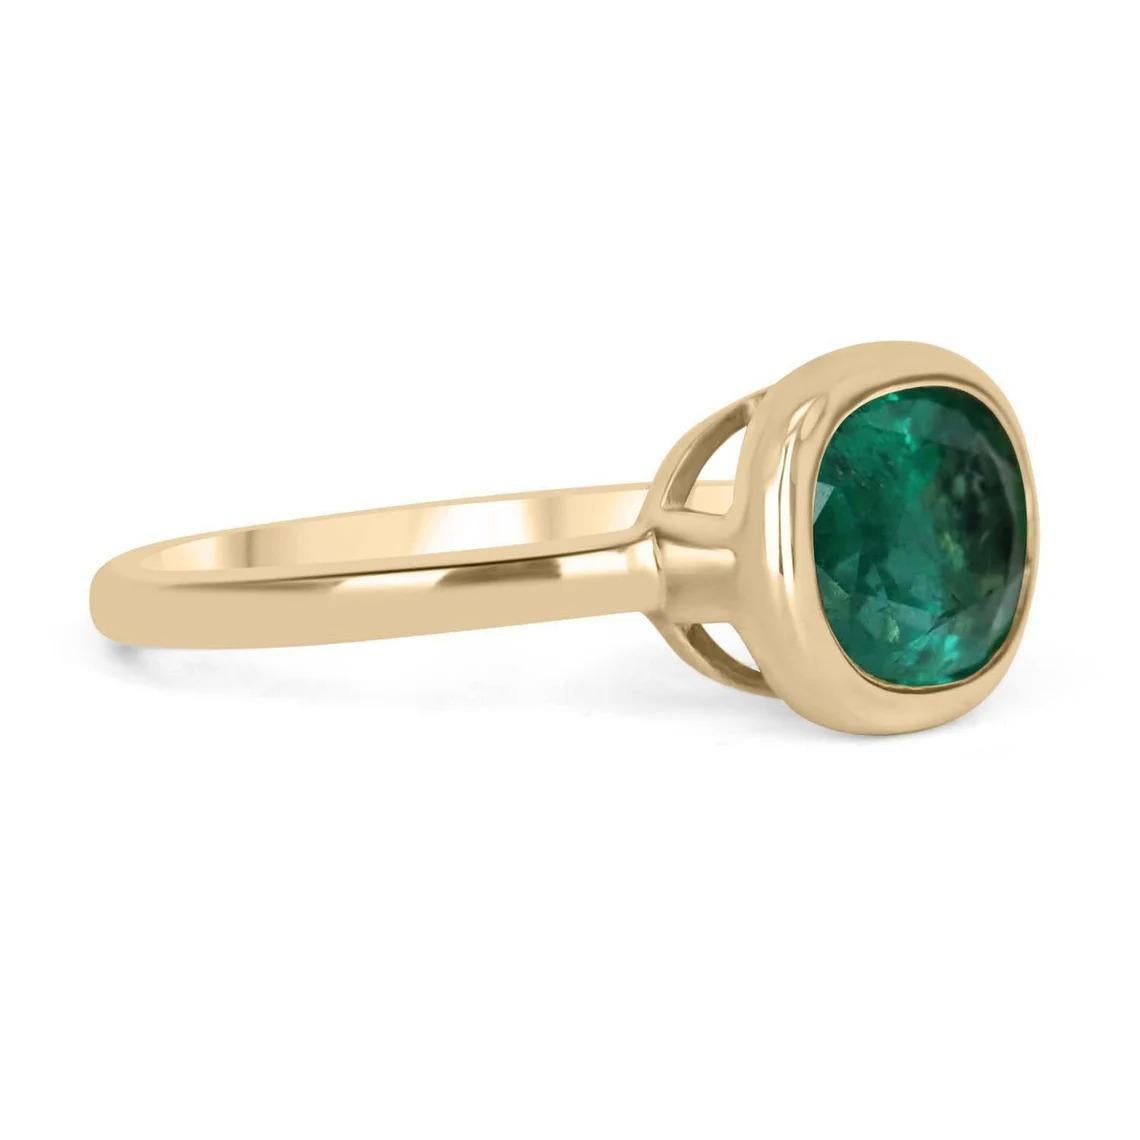 Displayed is a medium-dark green Colombian emerald, solitaire, oval cut bezel ring in 14K yellow gold. This gorgeous solitaire ring carries a full 2.68-carat emerald in a sleek bezel setting. The emerald has incredible clarity and luster. This